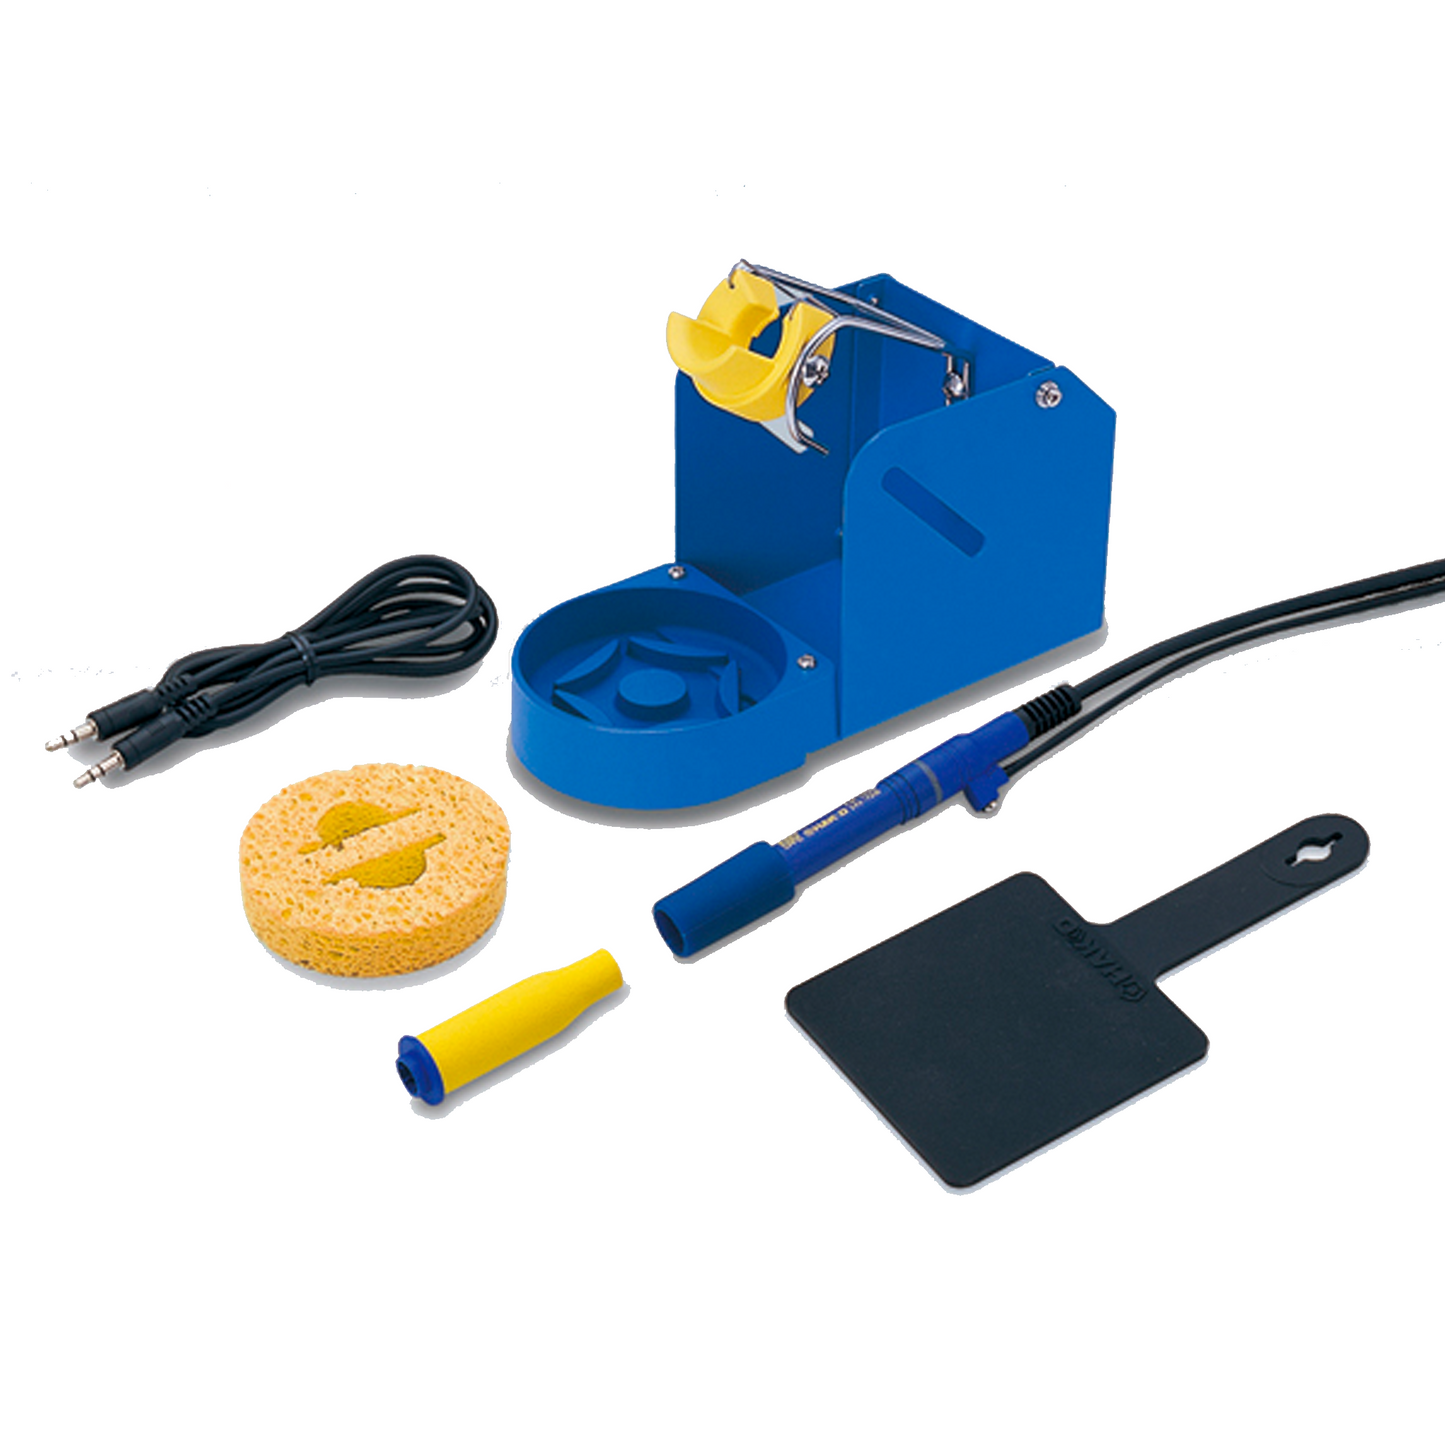 Hakko soldering iron FM2026 conversion kit Nitrogen soldering with nozzle for PCB SMT assembly production line. consist of soldering iron holder with cleaning sponge, soldering iron excluding tip, heat resistant pad, cable